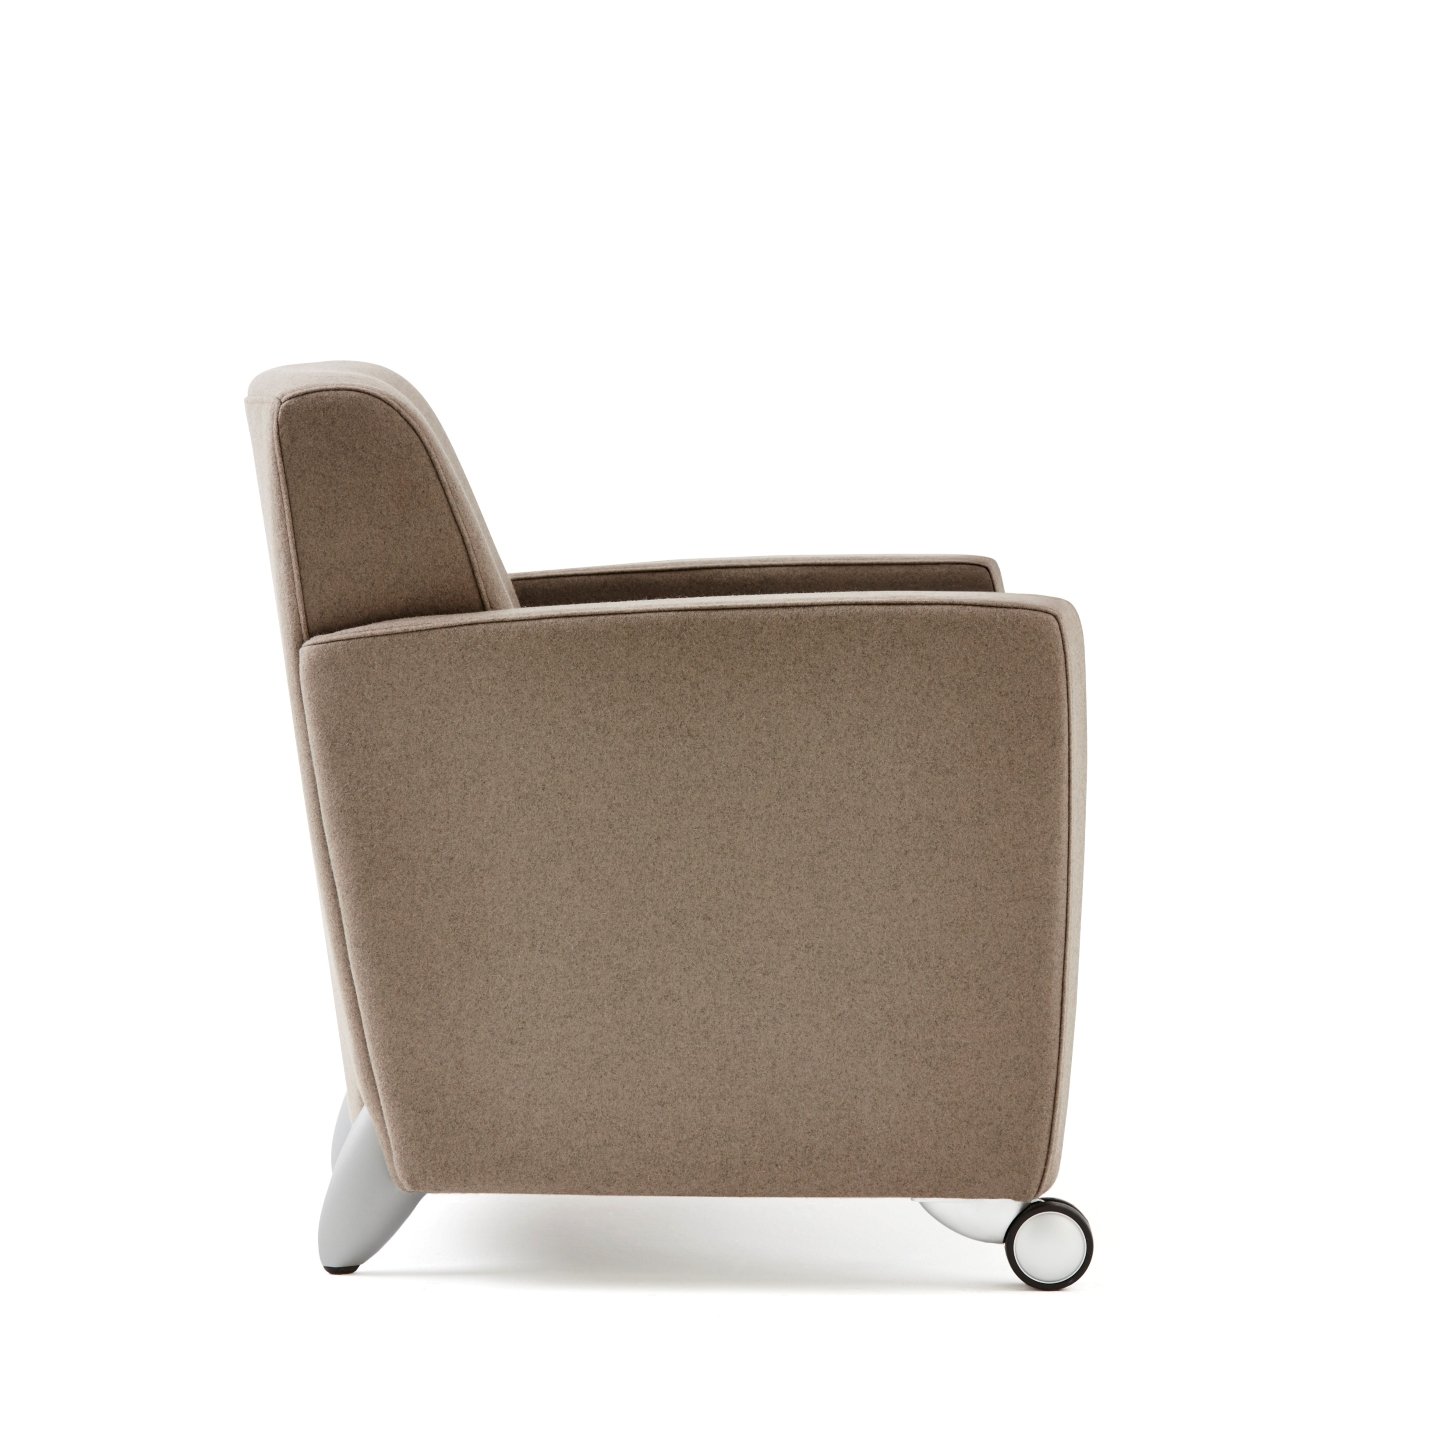 This Lounge Chair by Patricia Urquiola for Haworth is Perfect for